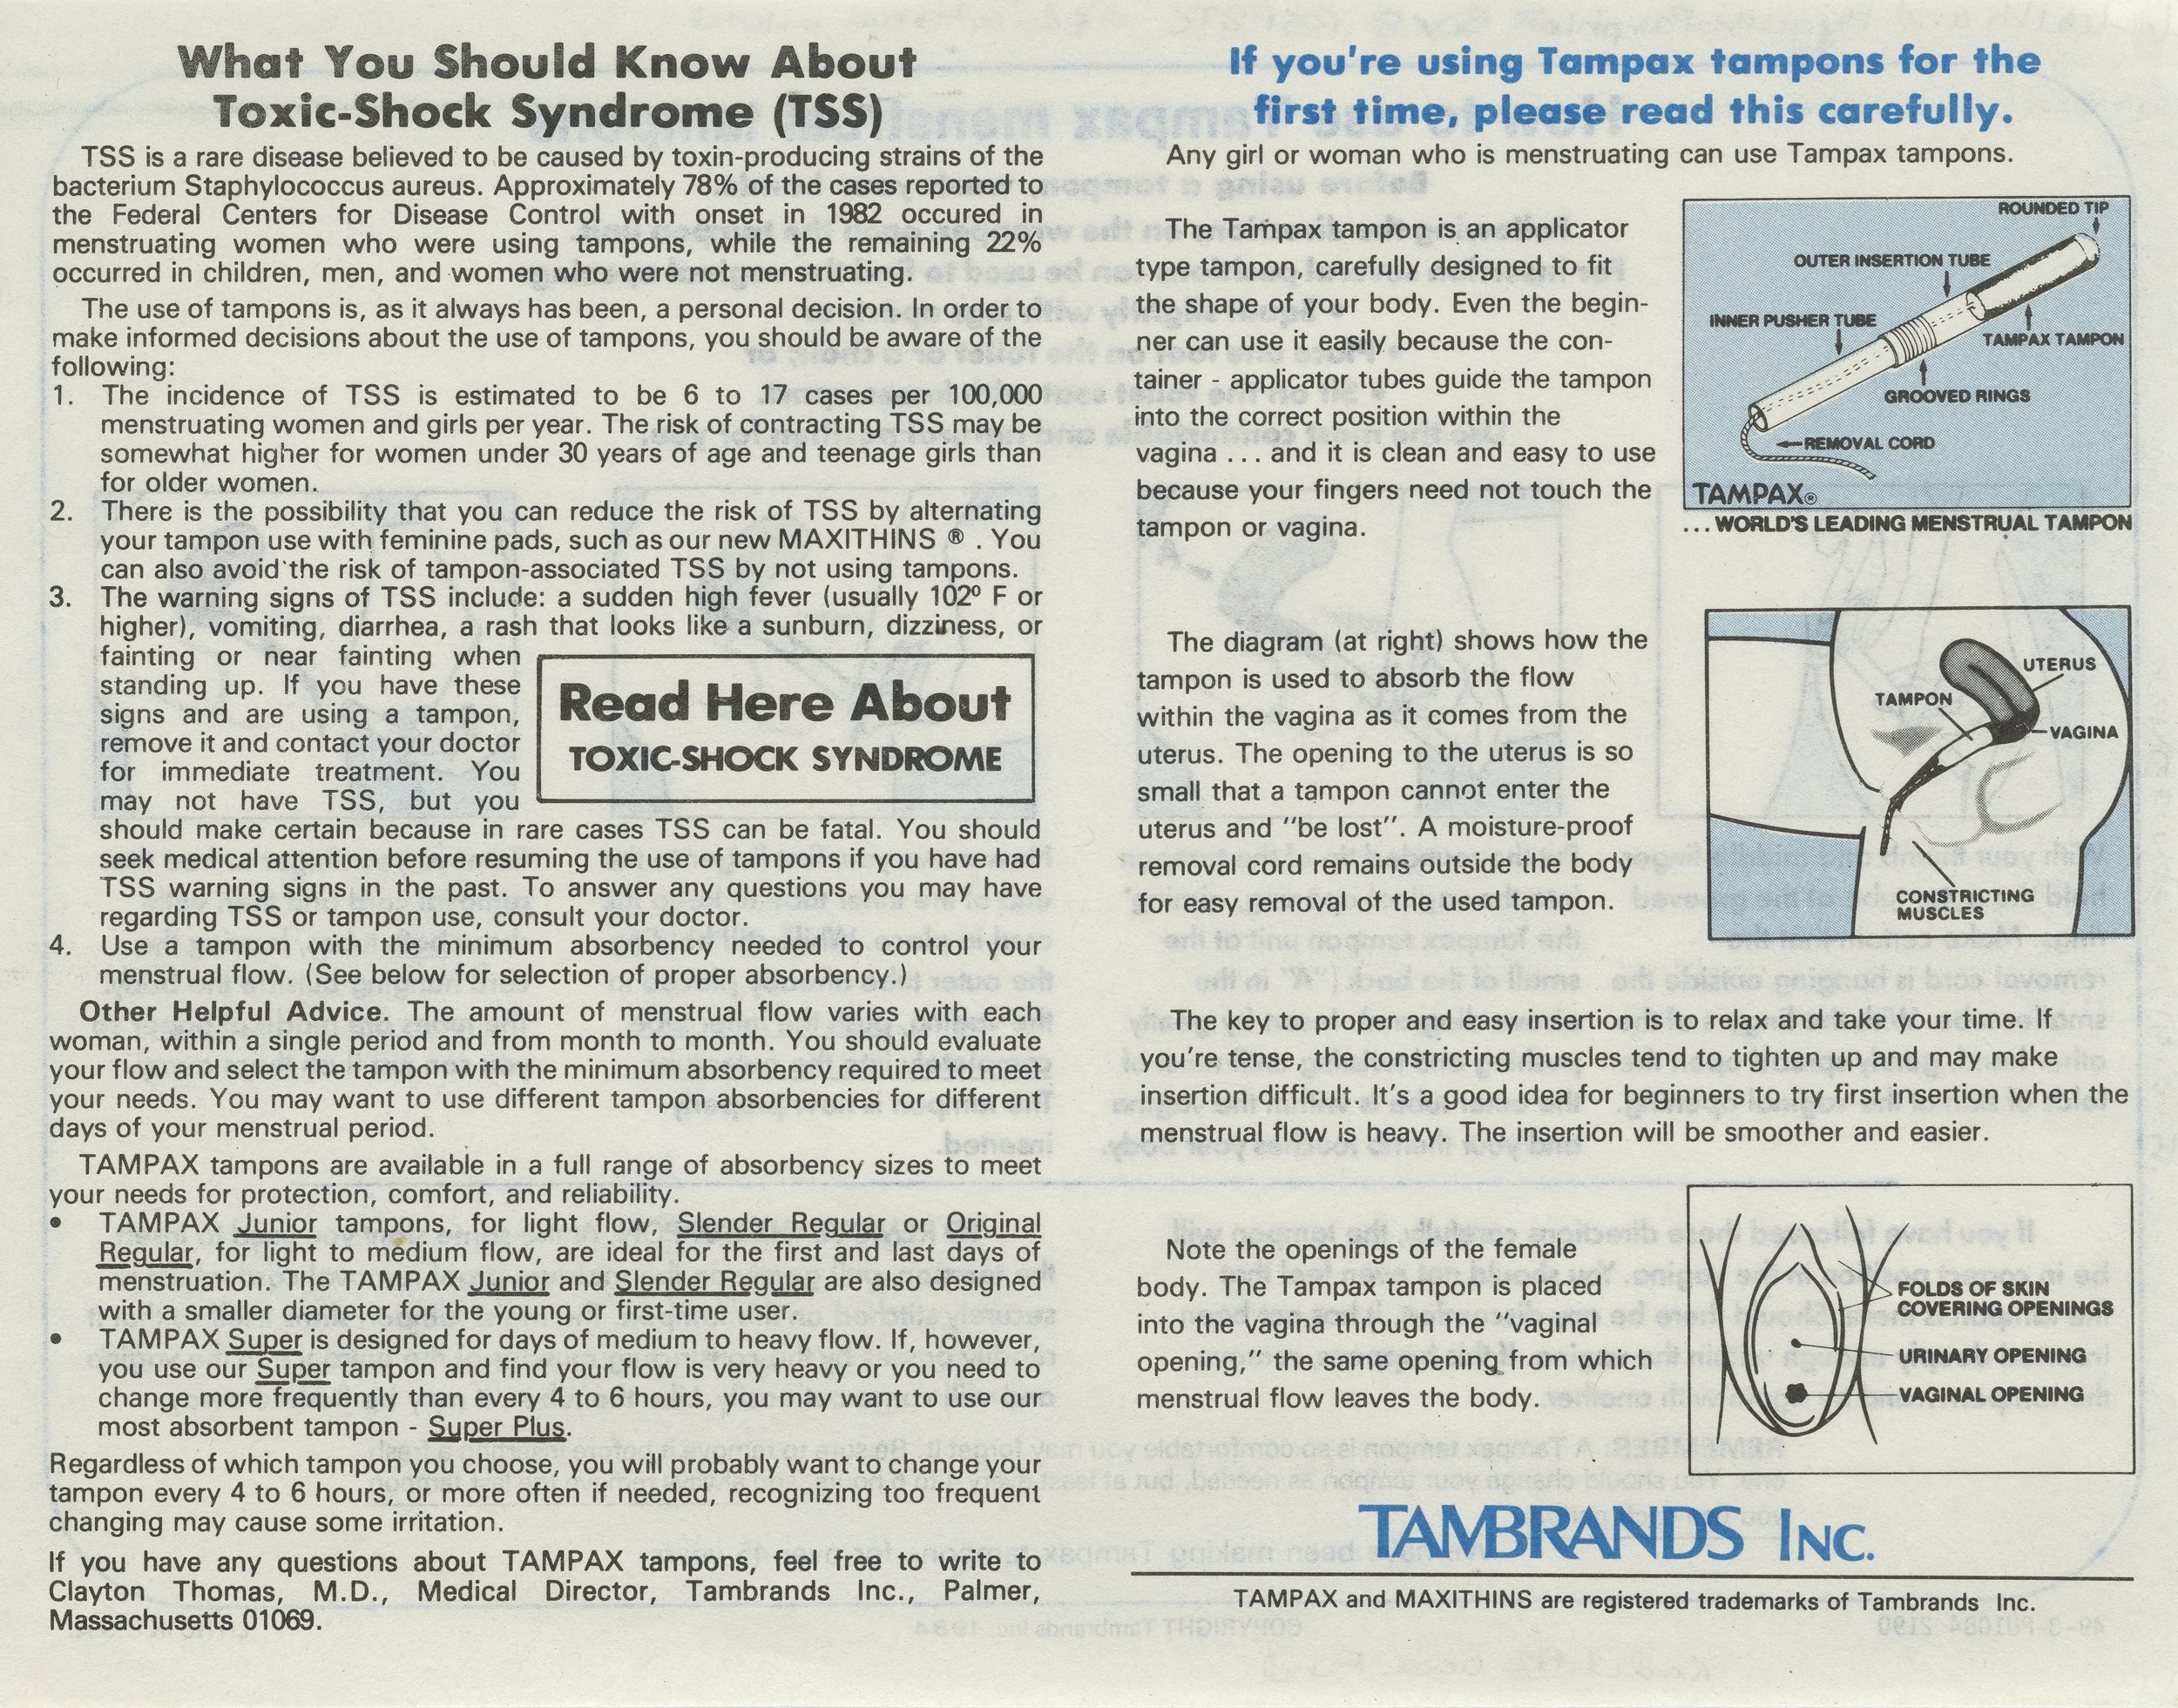 How To Use Tampax Tampons Sheet Schlesinger 990145768700203941